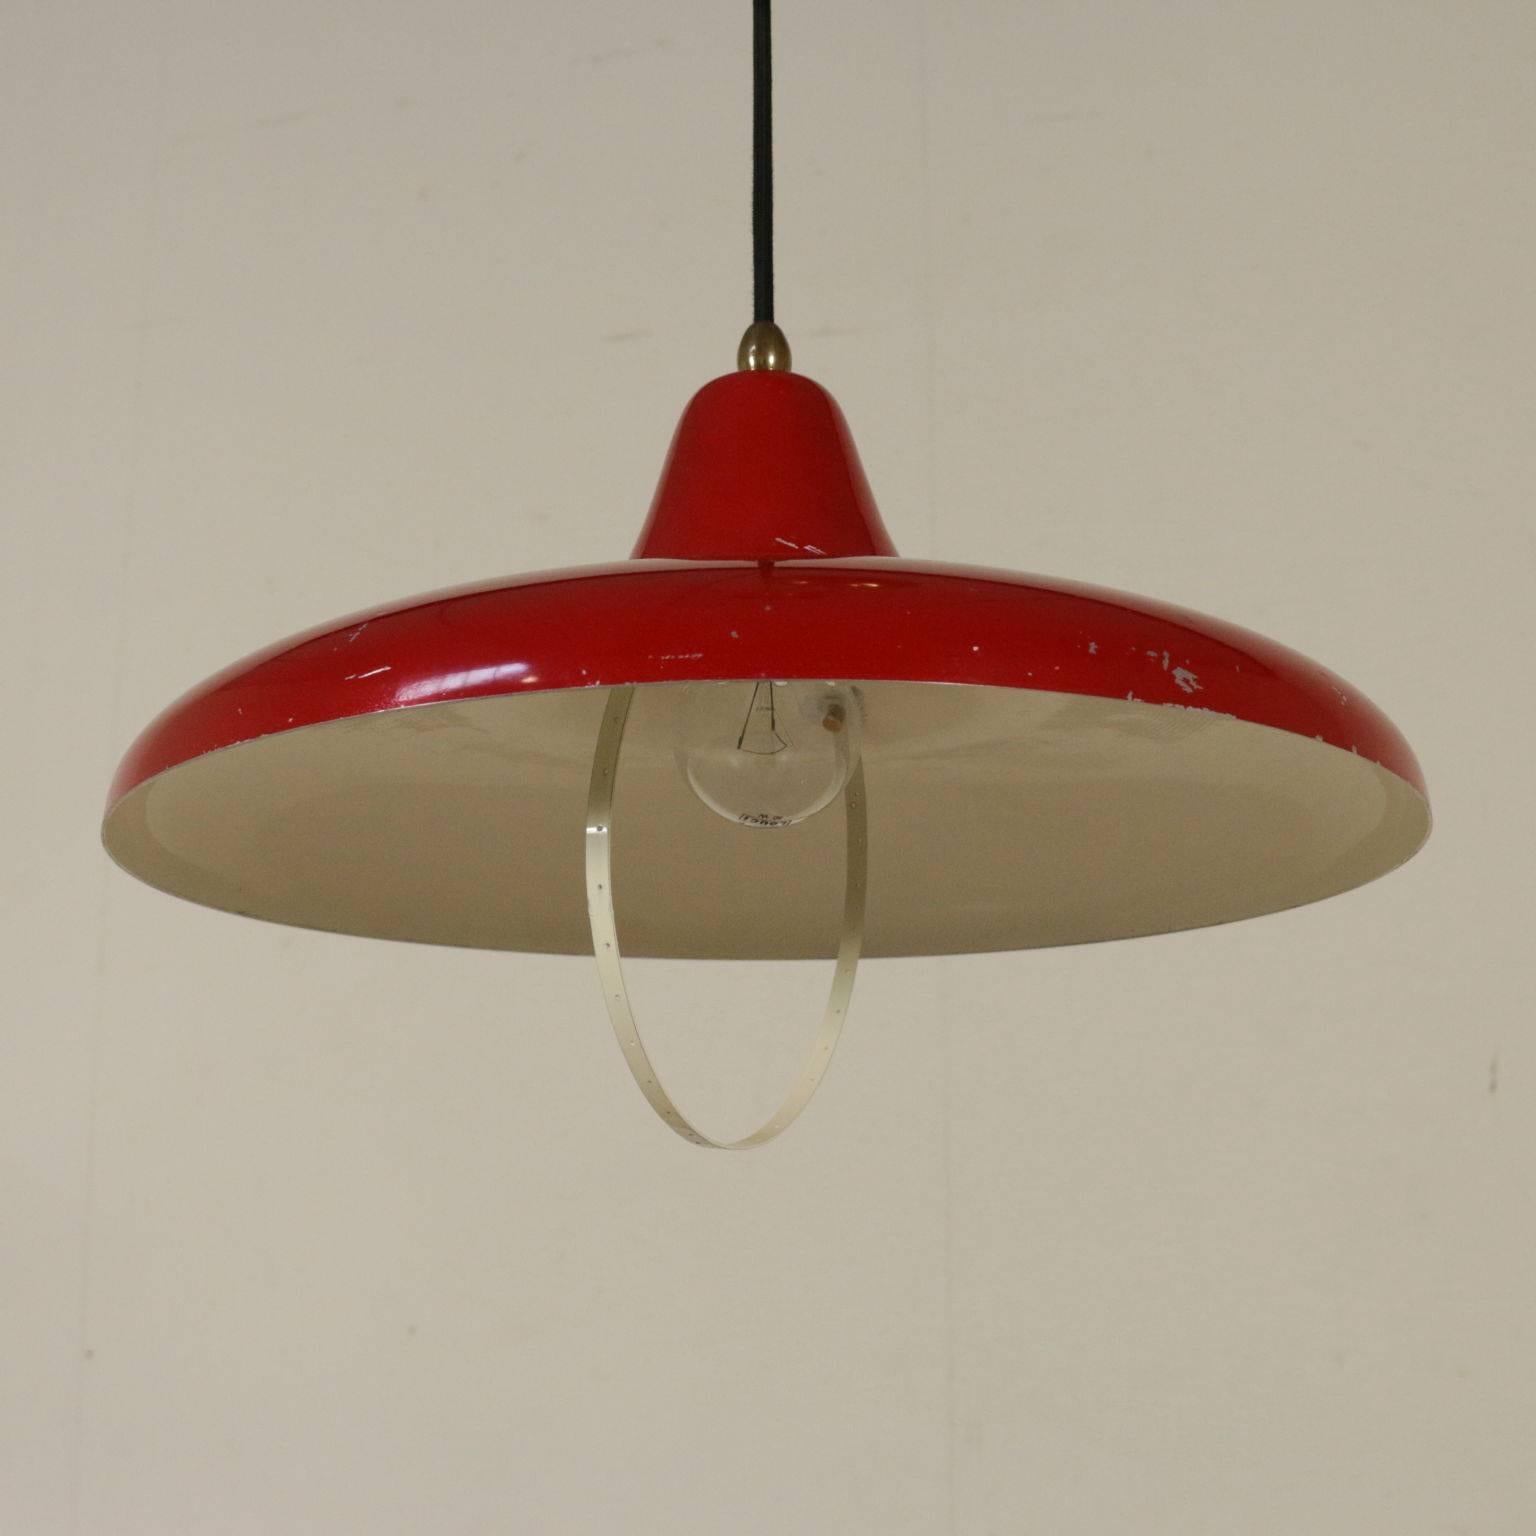 A ceiling lamp, lacquered aluminium and brass. Manufactured in Italy, 1950s-1960s.